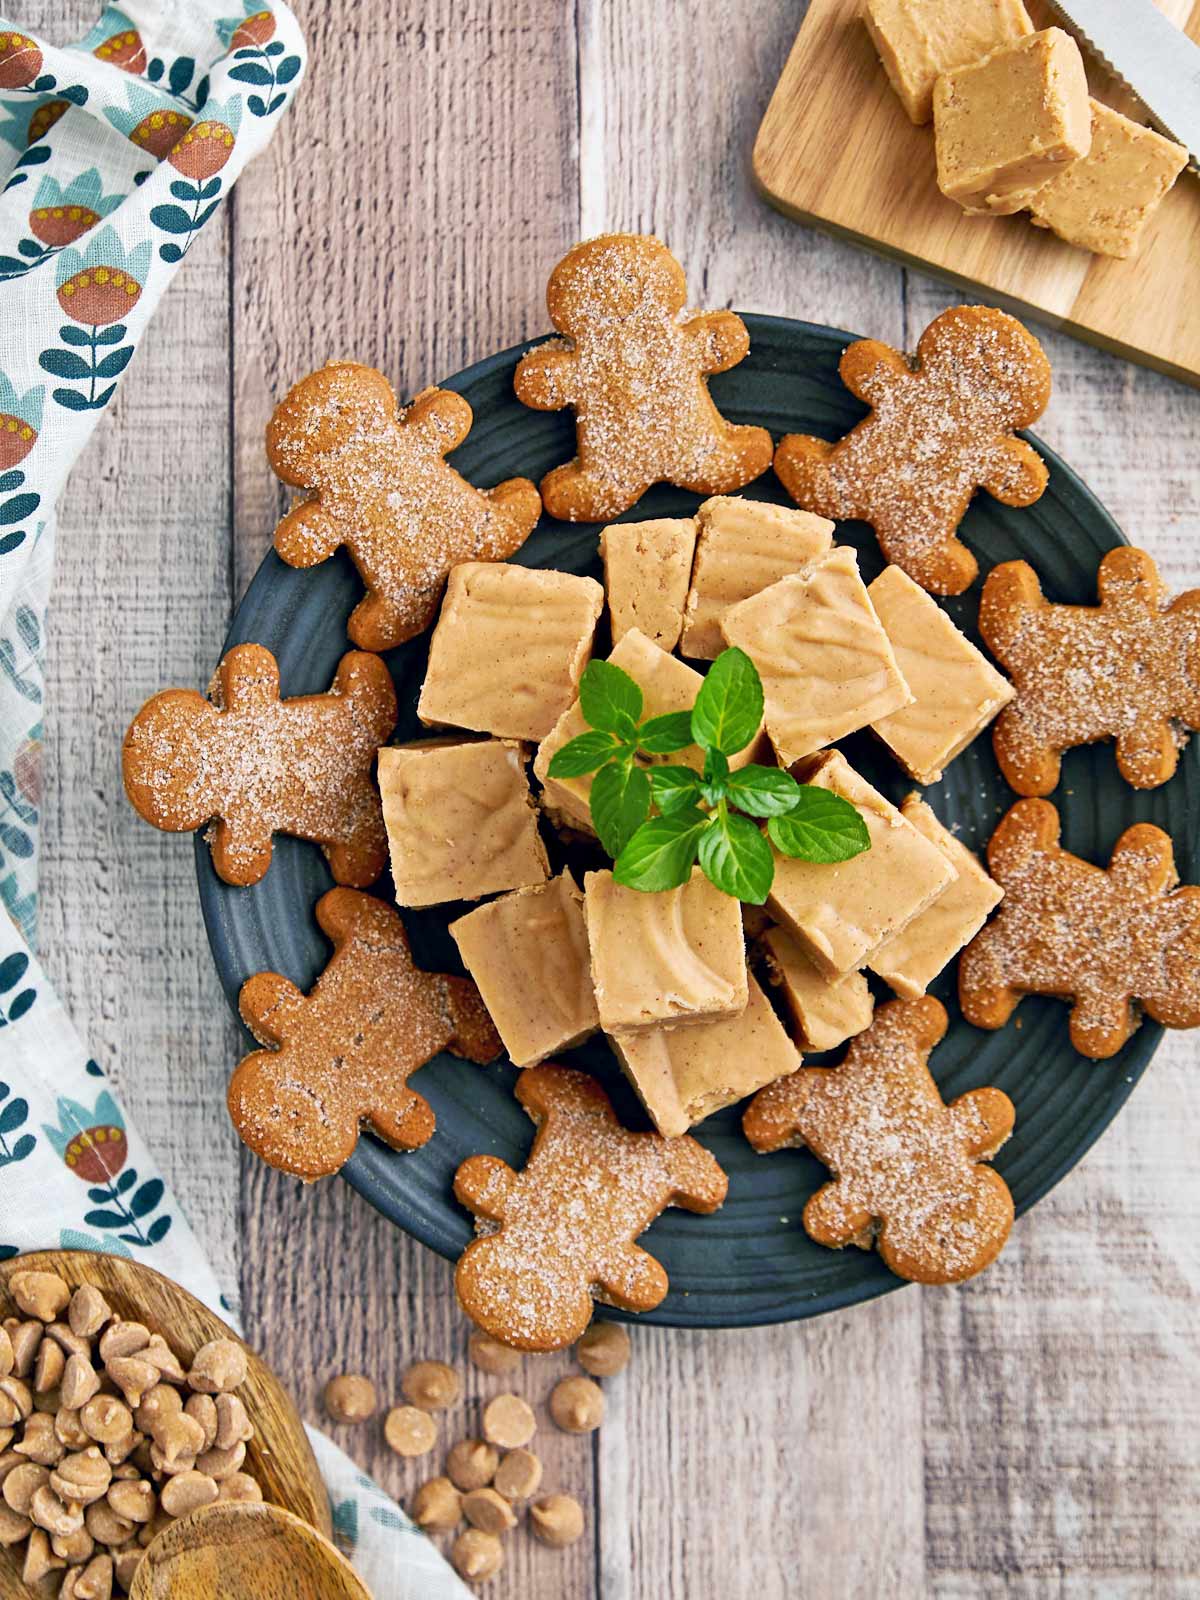 Plate of peanut butter fudge surround by gingerbread men.